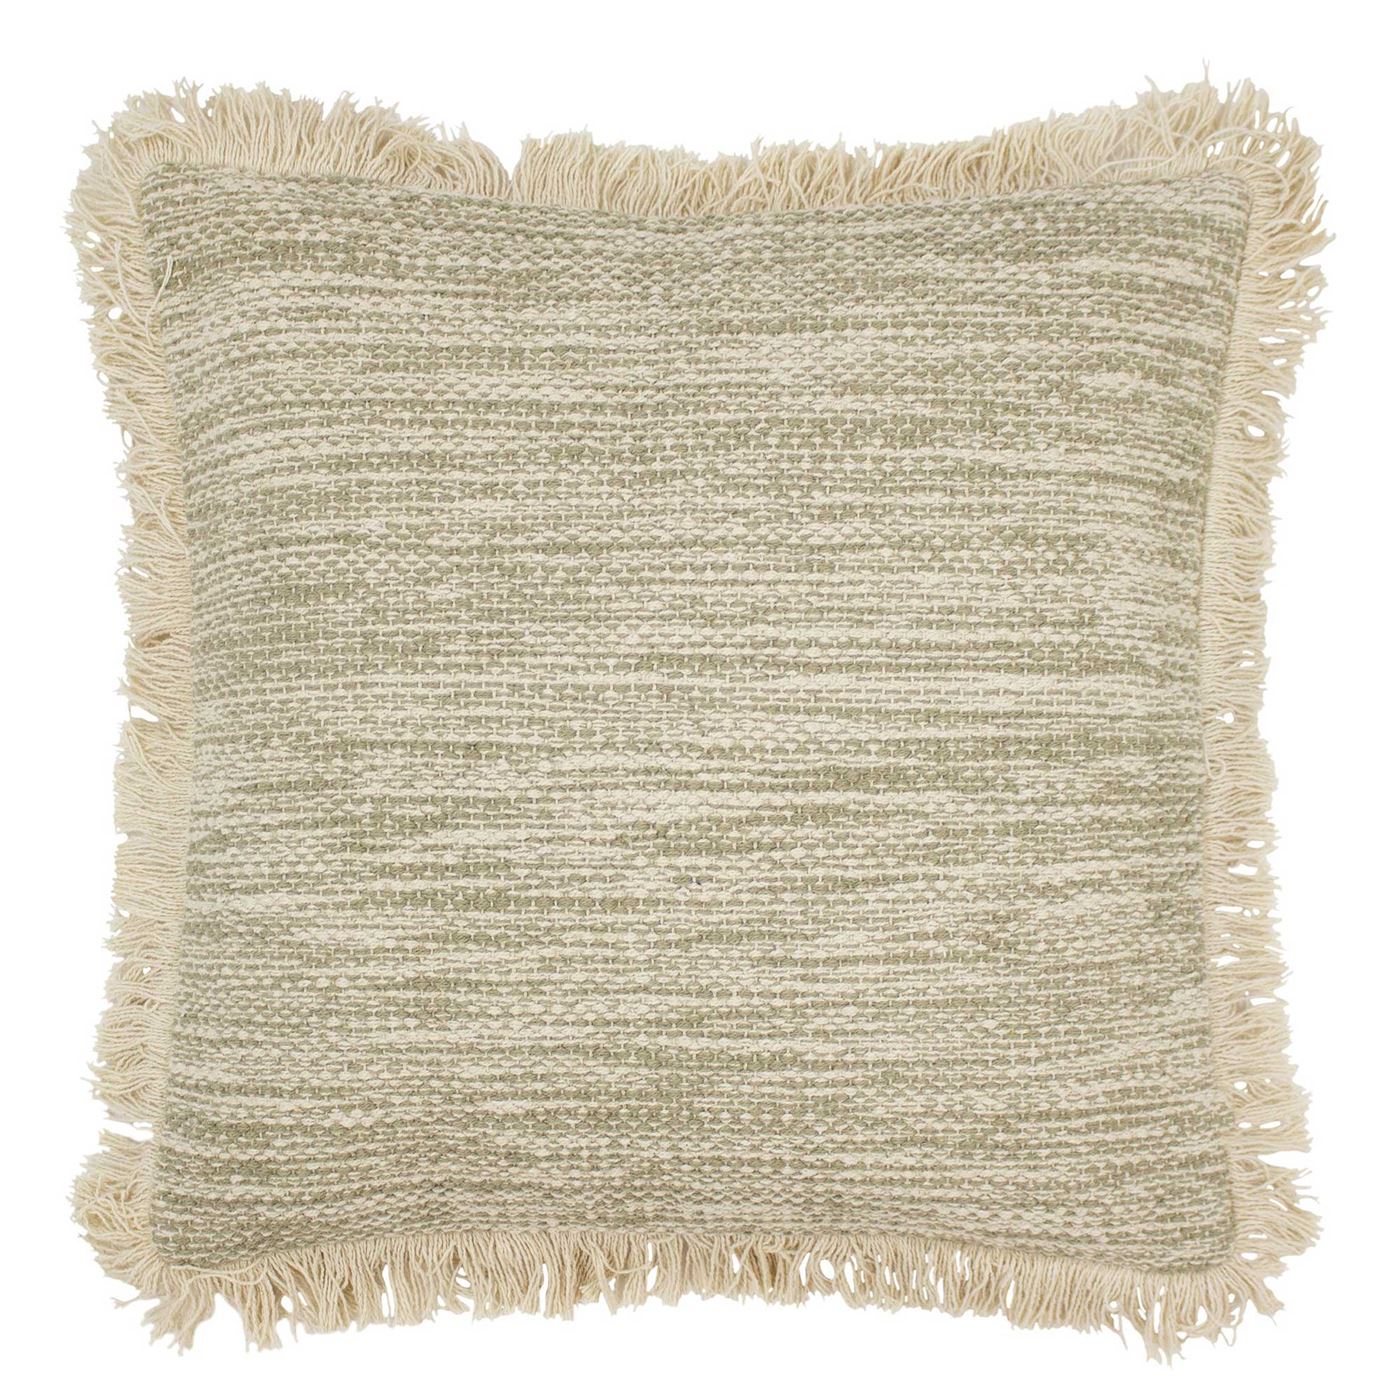 Boucle Natural Cushion, Square, Neutral | Barker & Stonehouse